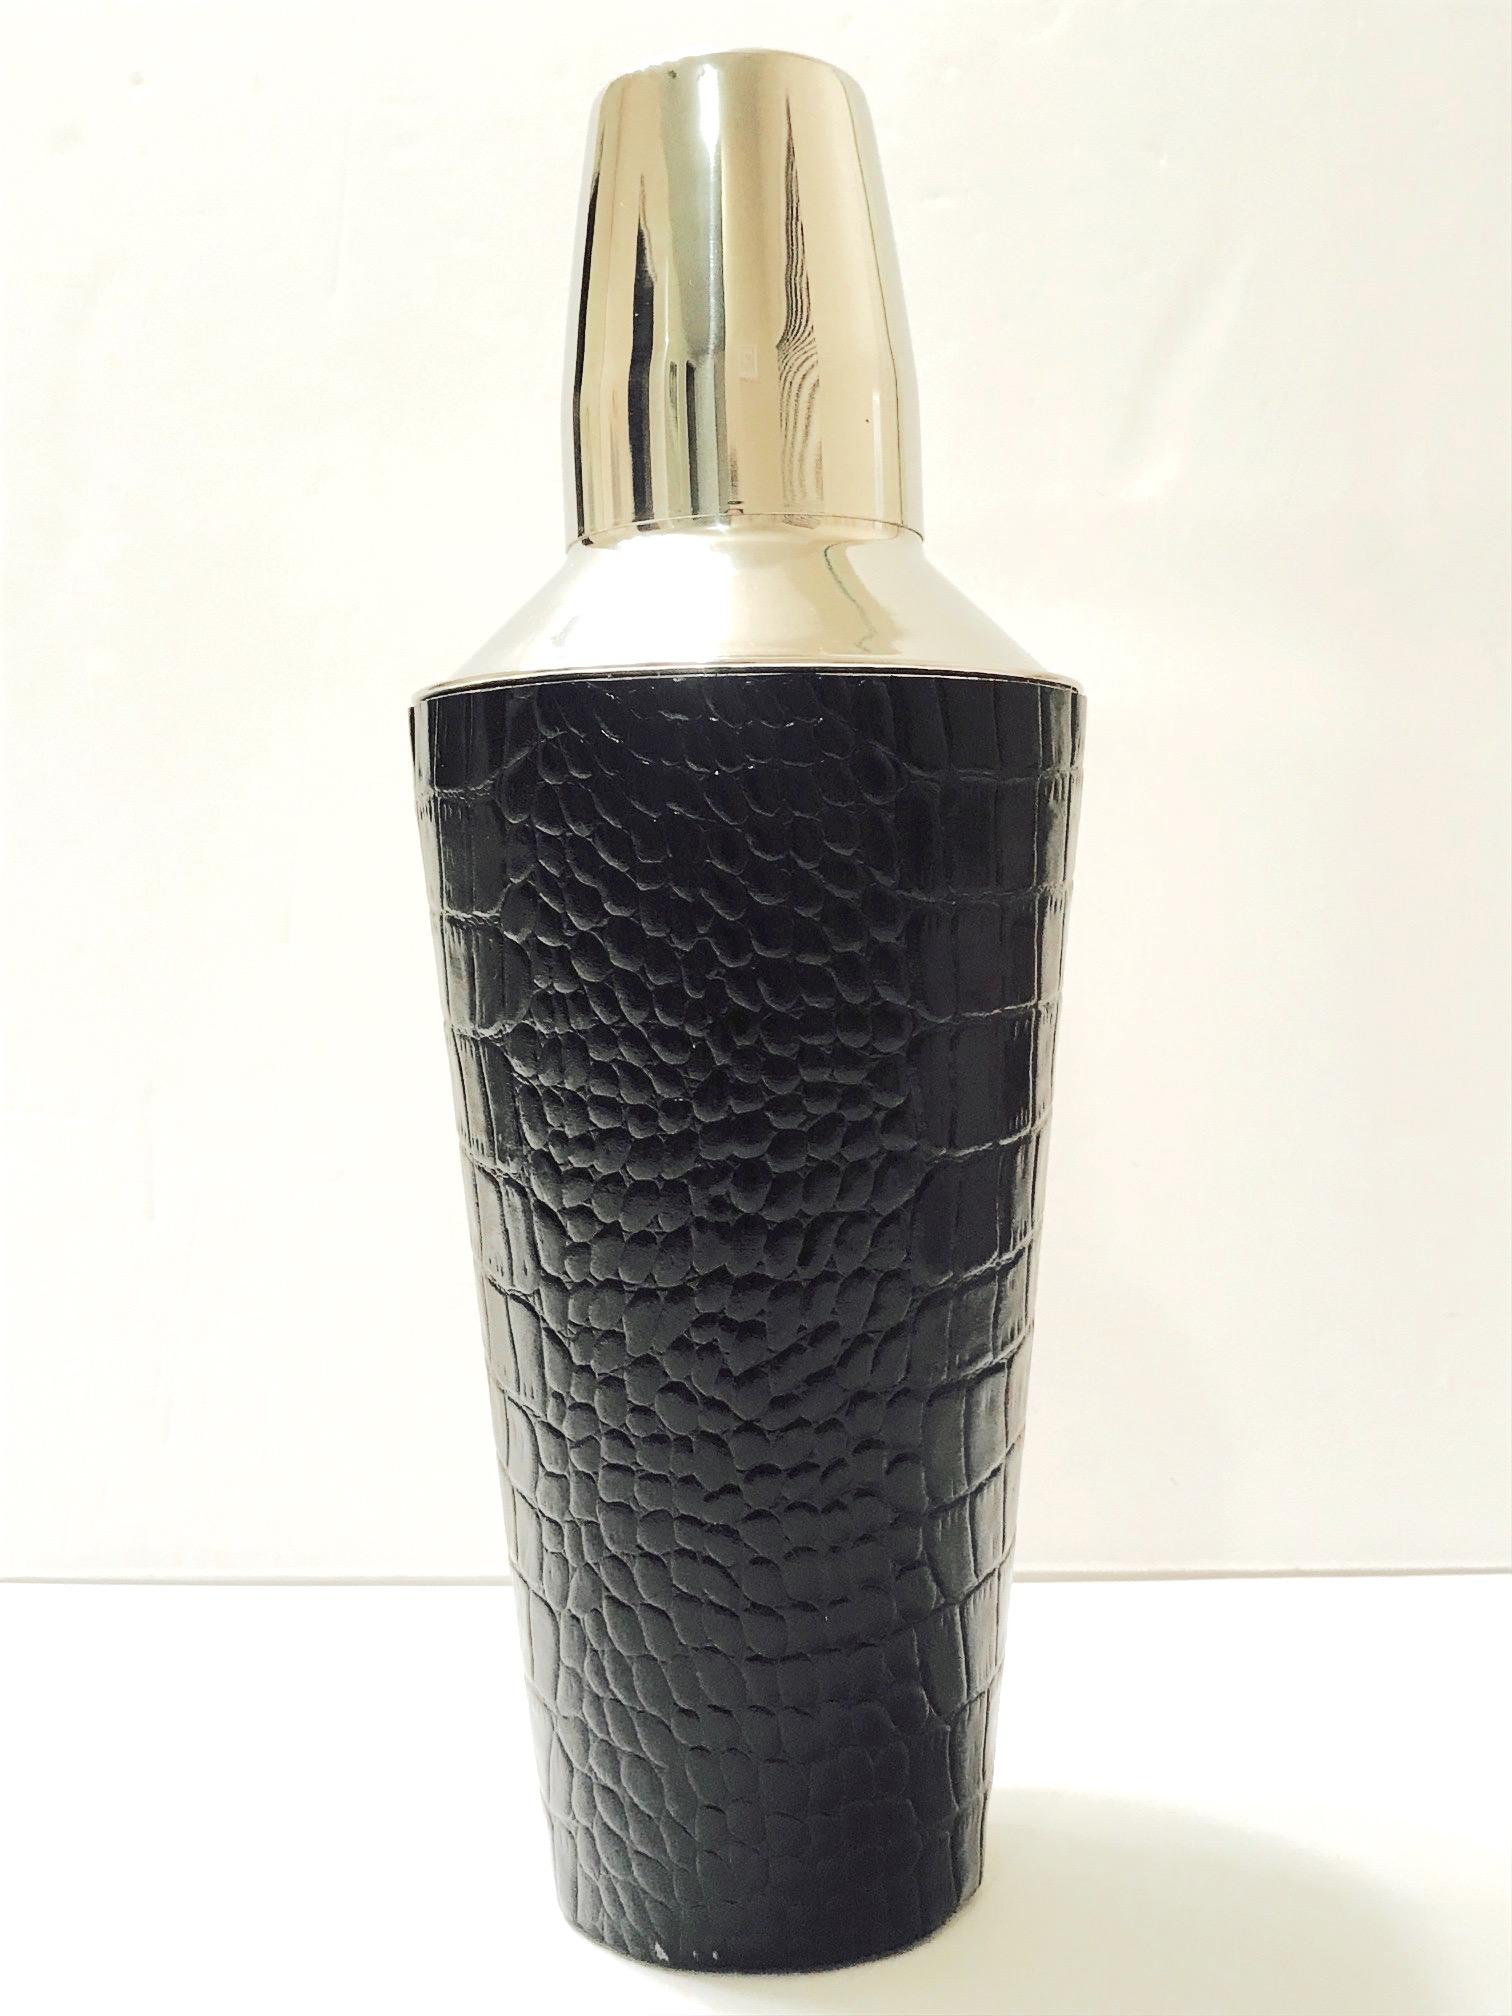 Chic martini shaker for the cocktail enthusiast. Stainless steel wrapped in embossed black leather with crocodile print. Has never been used and is in mint condition.